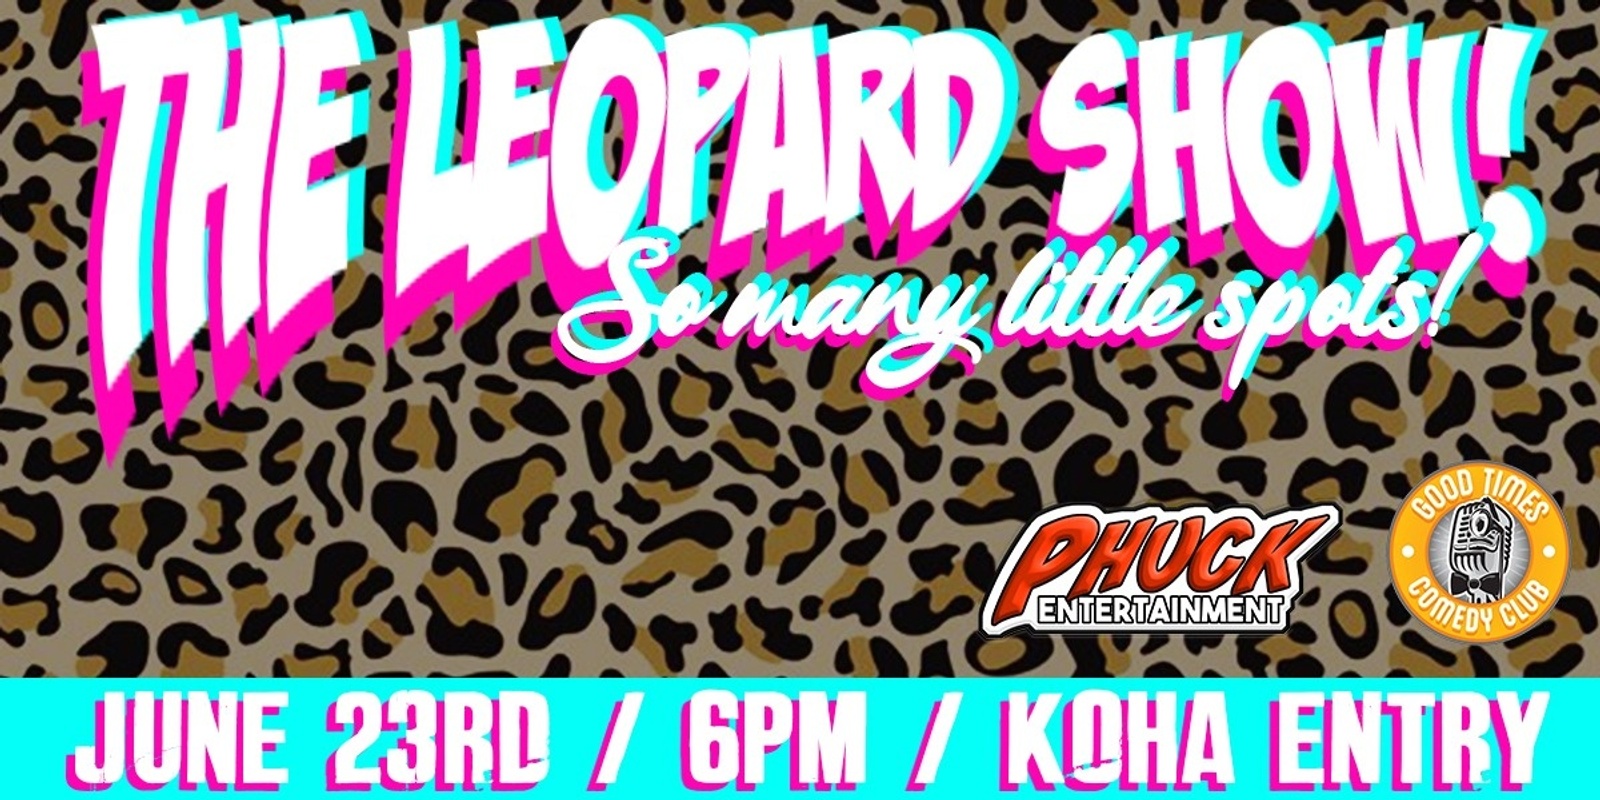 The Leopard Show - So Many Little Spots!